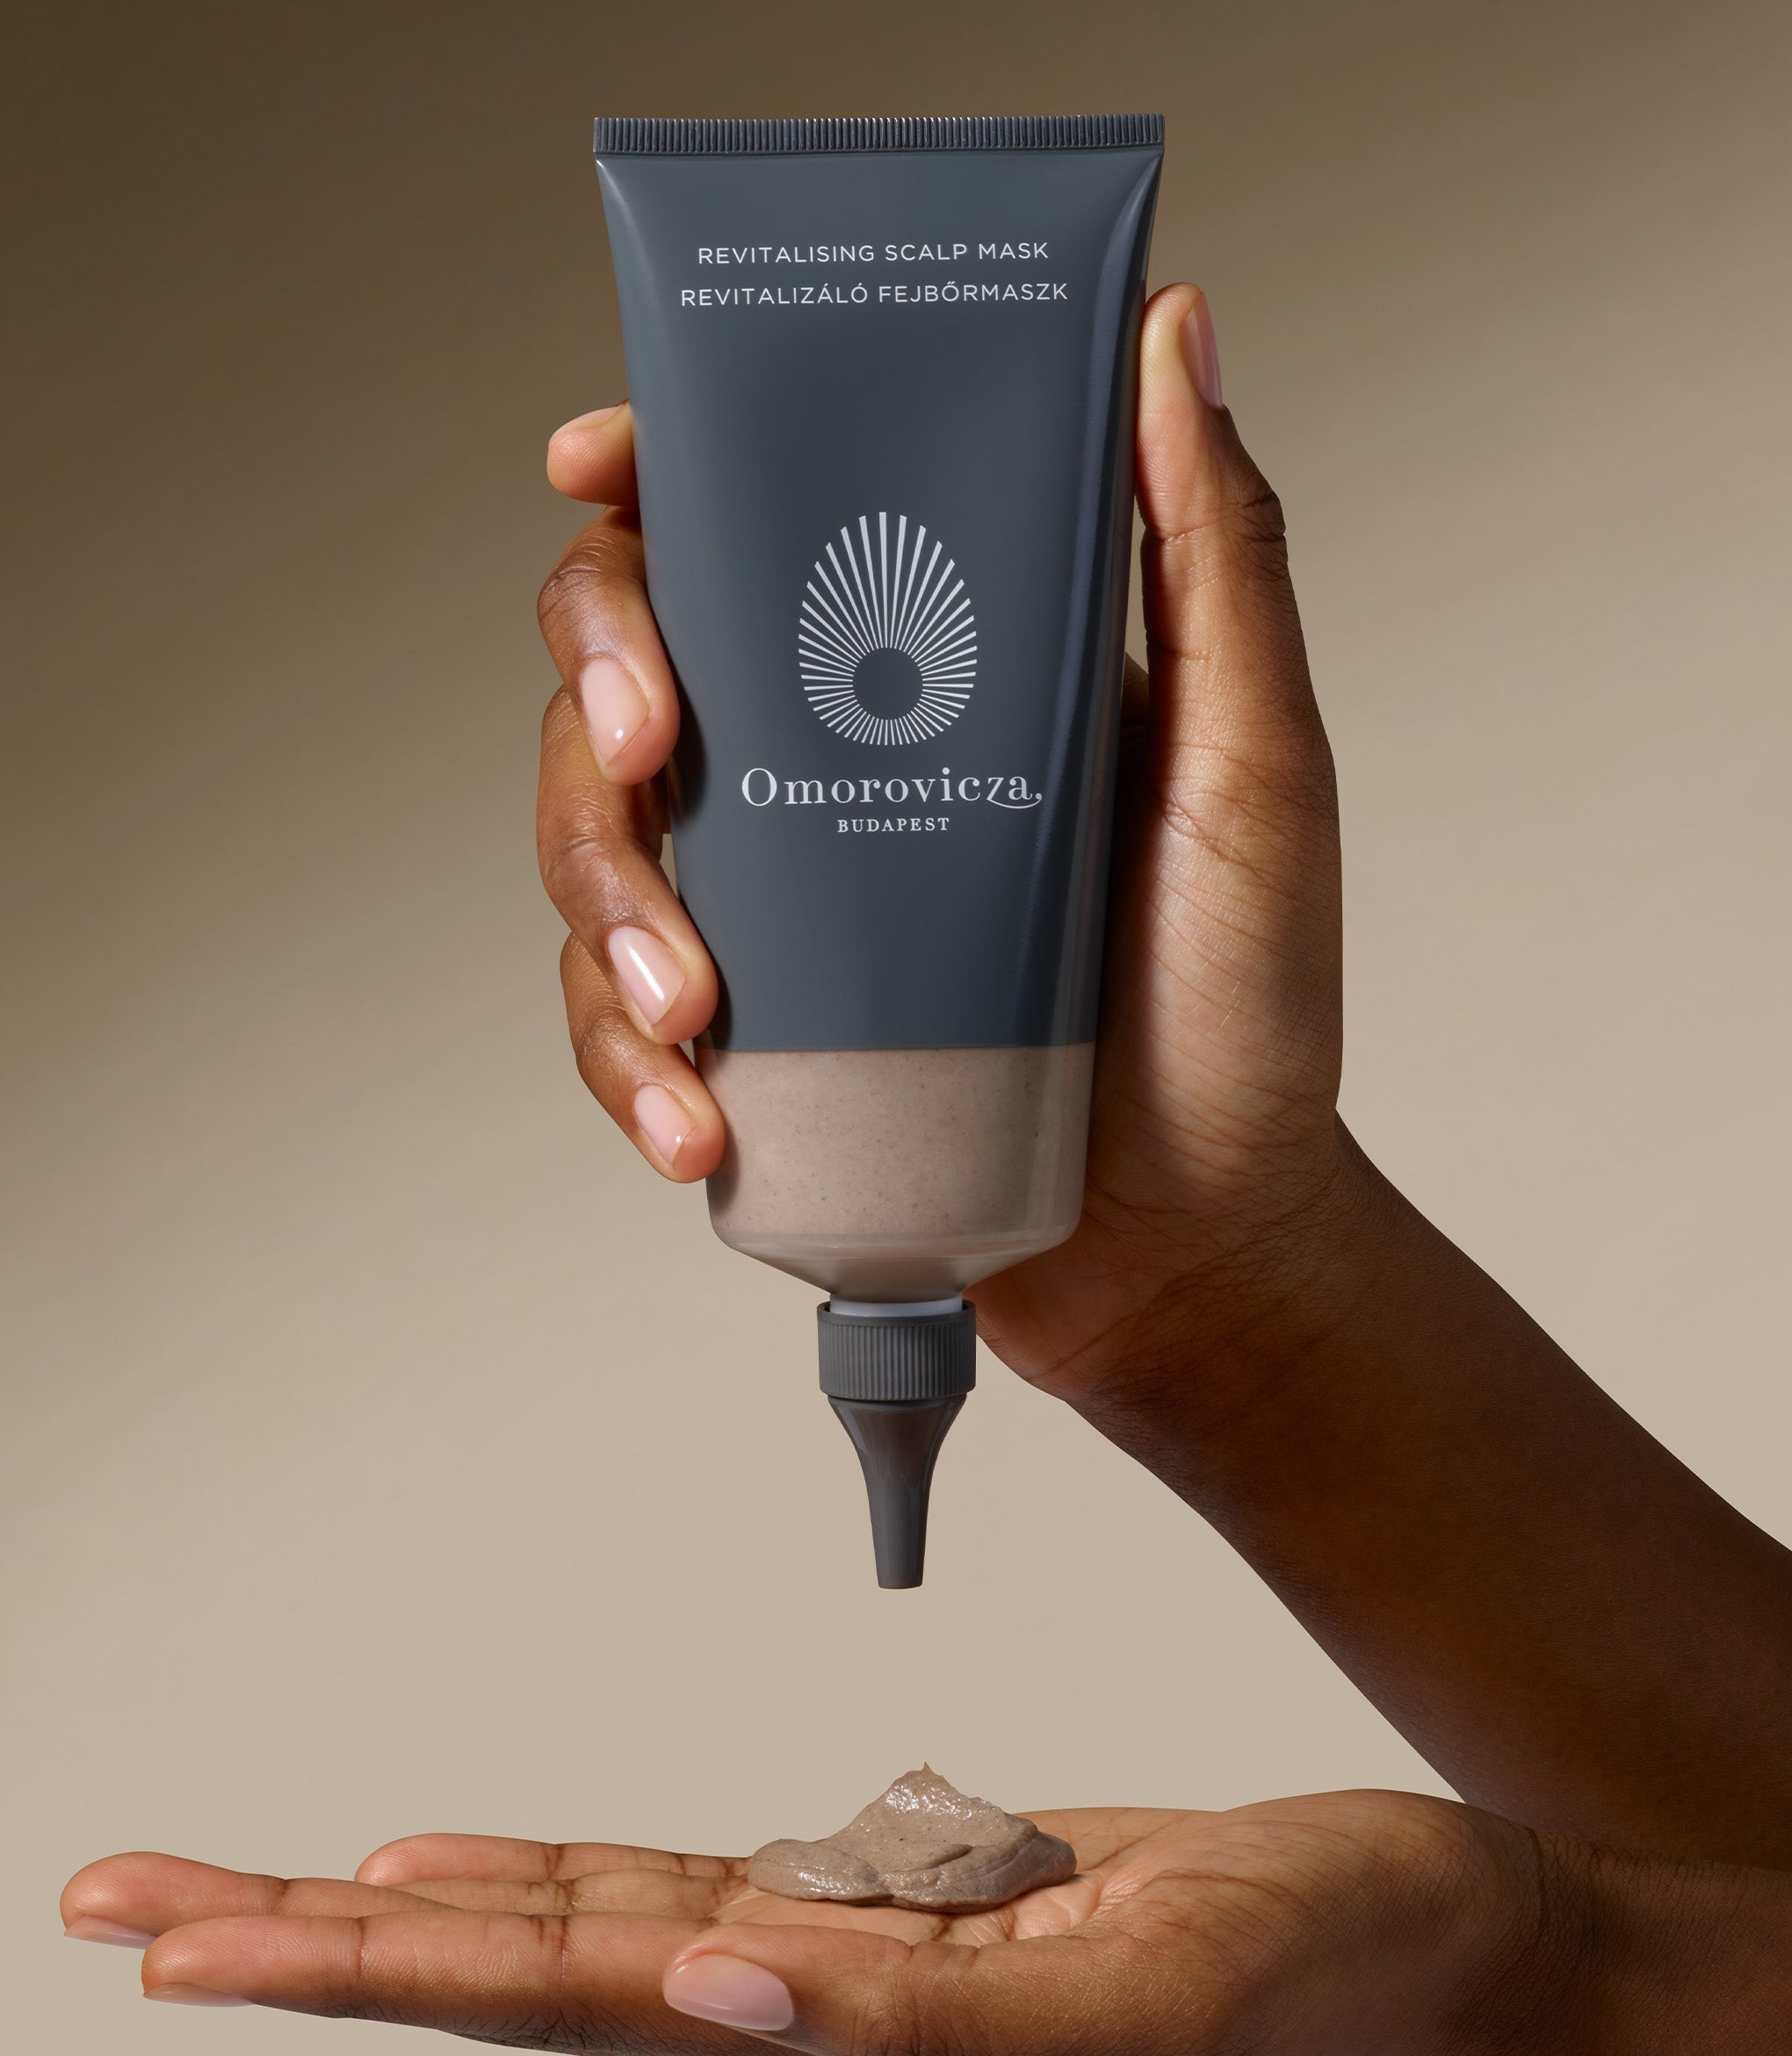 A hand is holding Revitalising Scalp Mask. A plum size of the product is in another hand